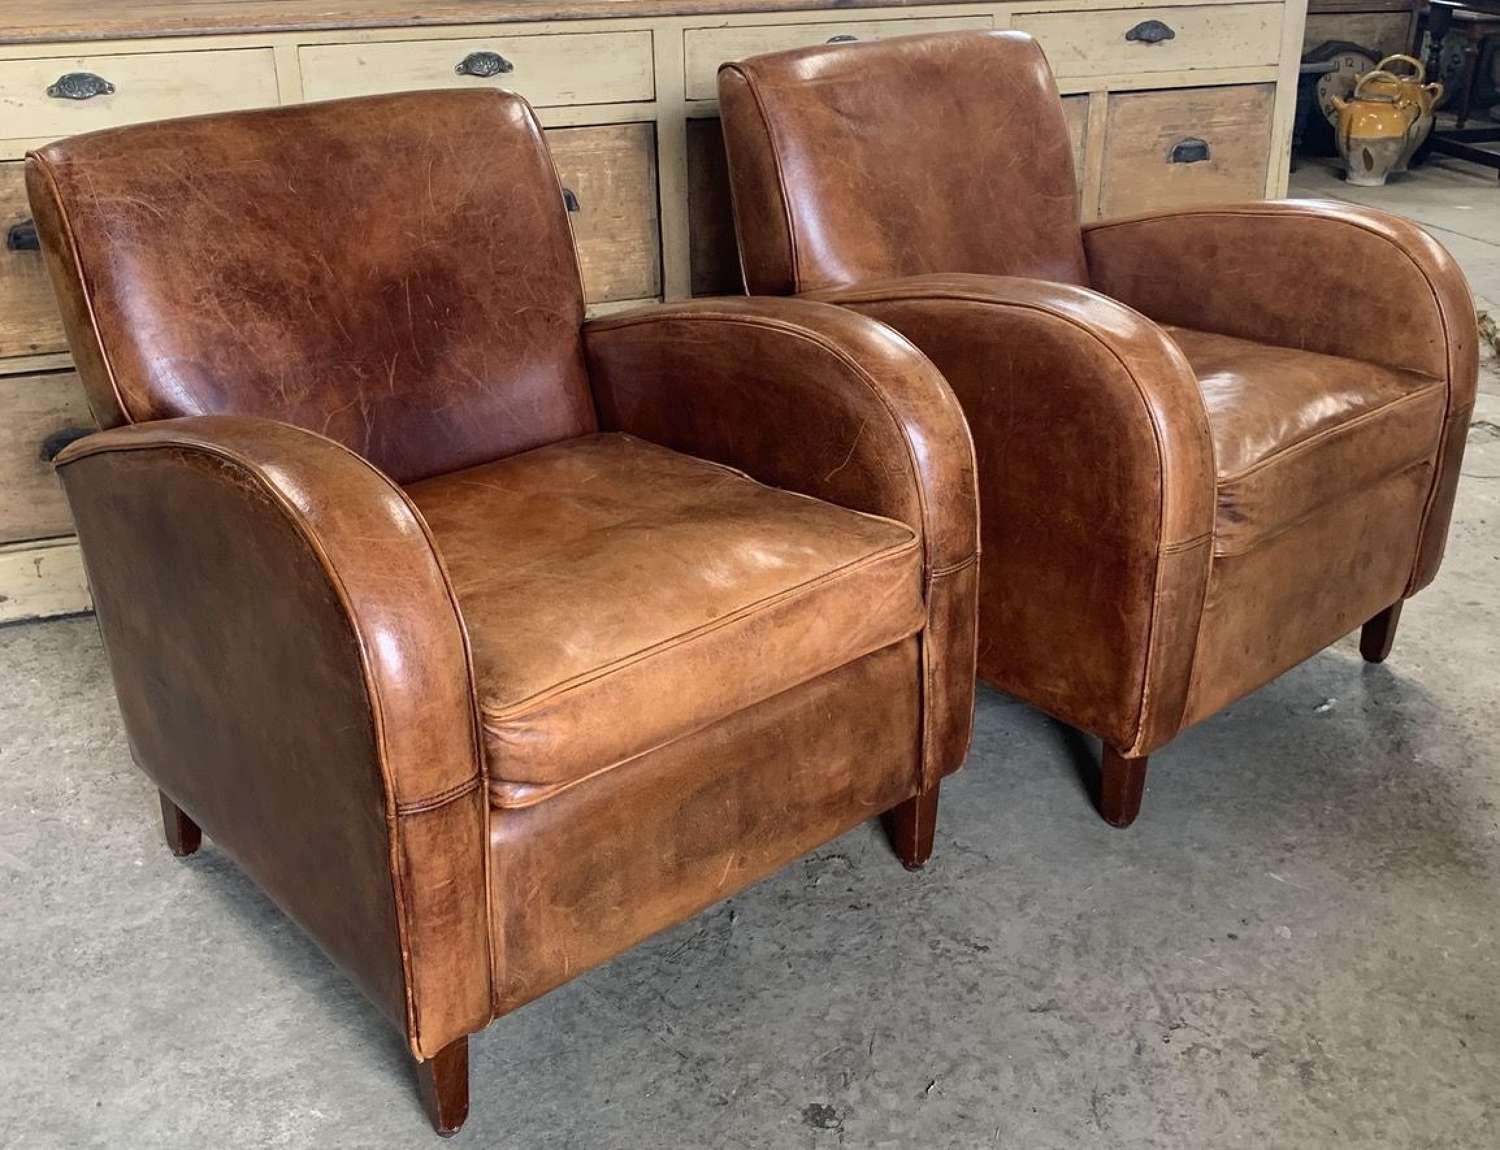 PAIR OF ART DECO STYLE ARMCHAIRS